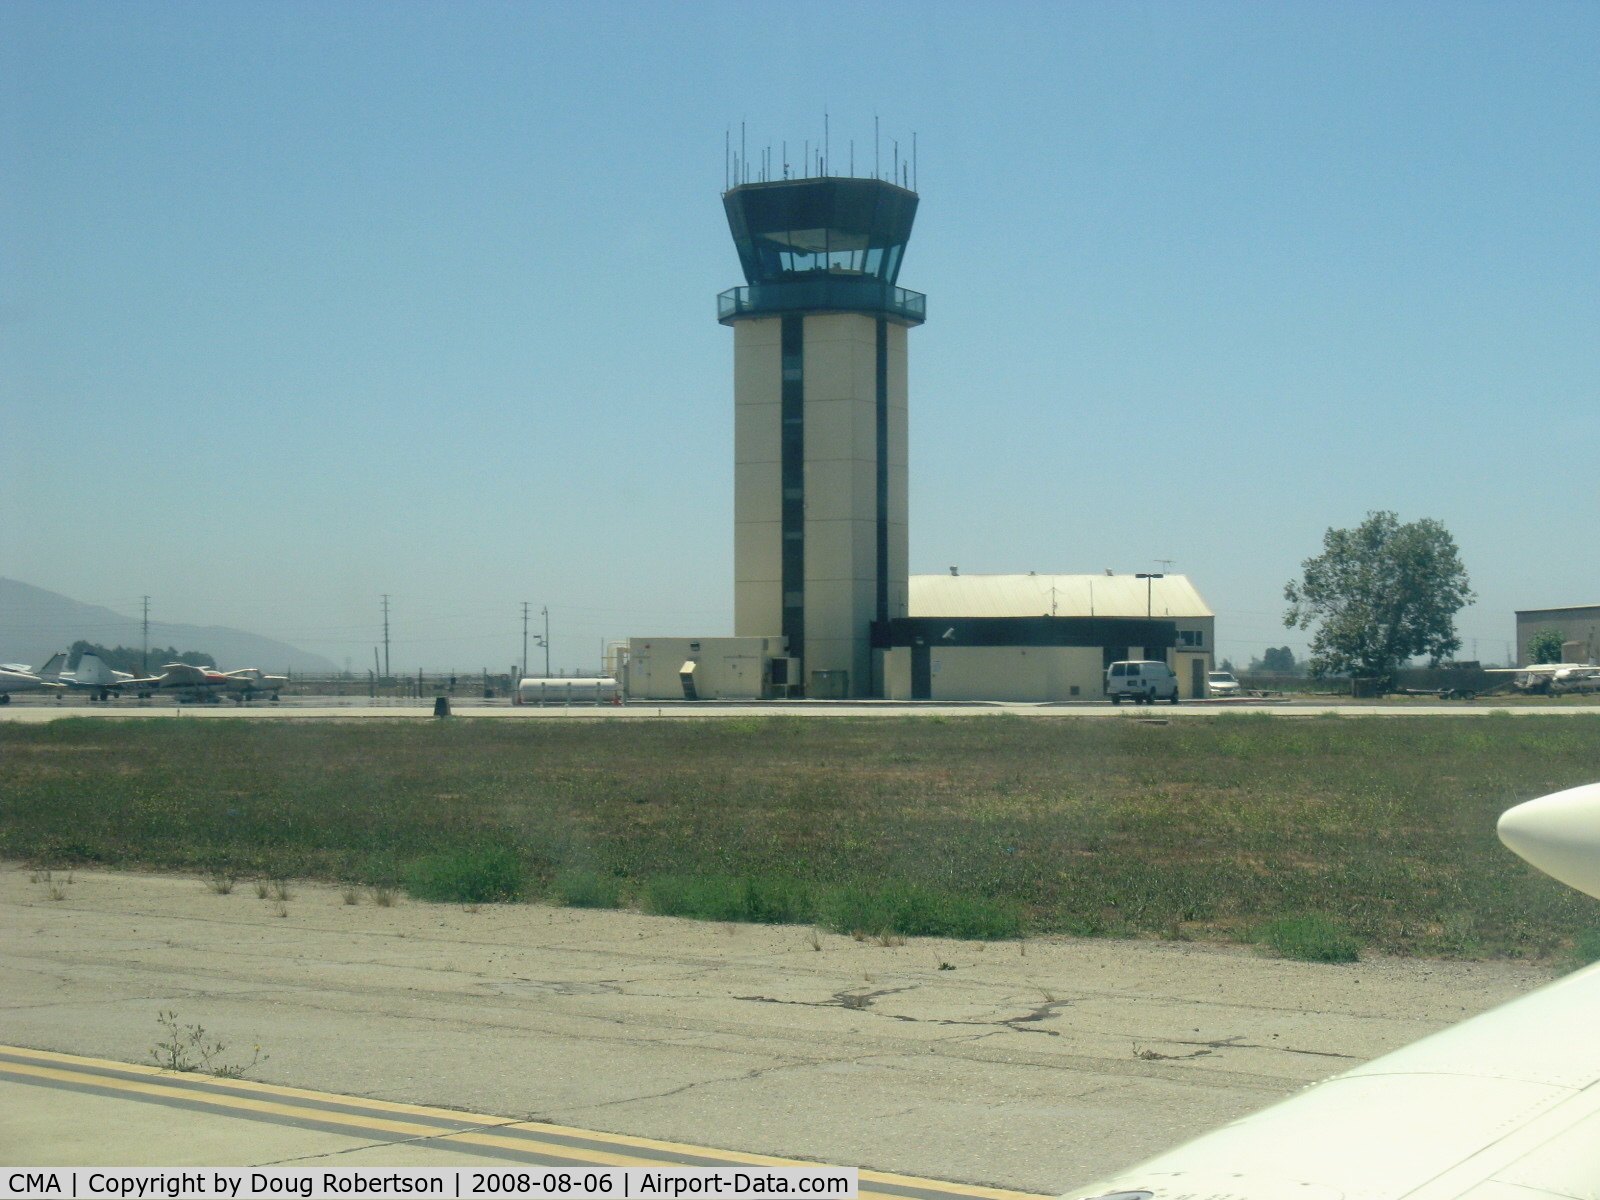 Camarillo Airport (CMA) - Air Traffic Control Tower, from taxiway in N2111Q arriving home base